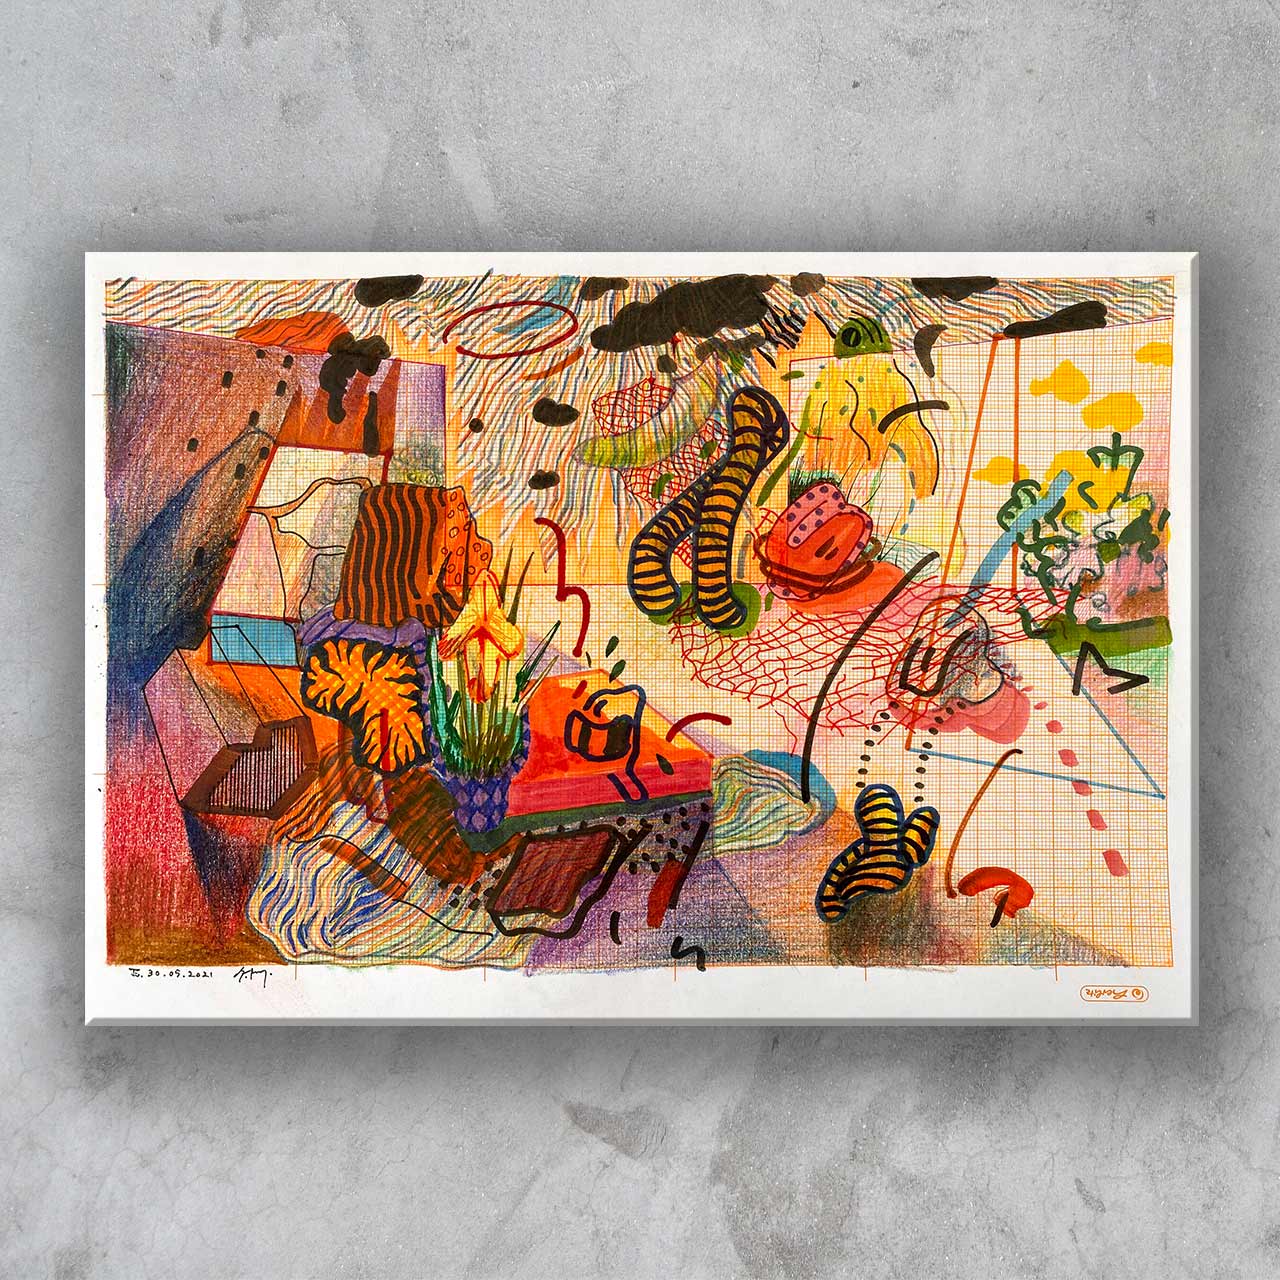 <strong>Dimension:</strong> 21 x 29,7 cm <strong>Framed dim.:</strong> 32,5 x 41,5 cm <strong>Technique: </strong>colored pencils and markers <strong>Edition:</strong> unique <strong>Status:</strong> available